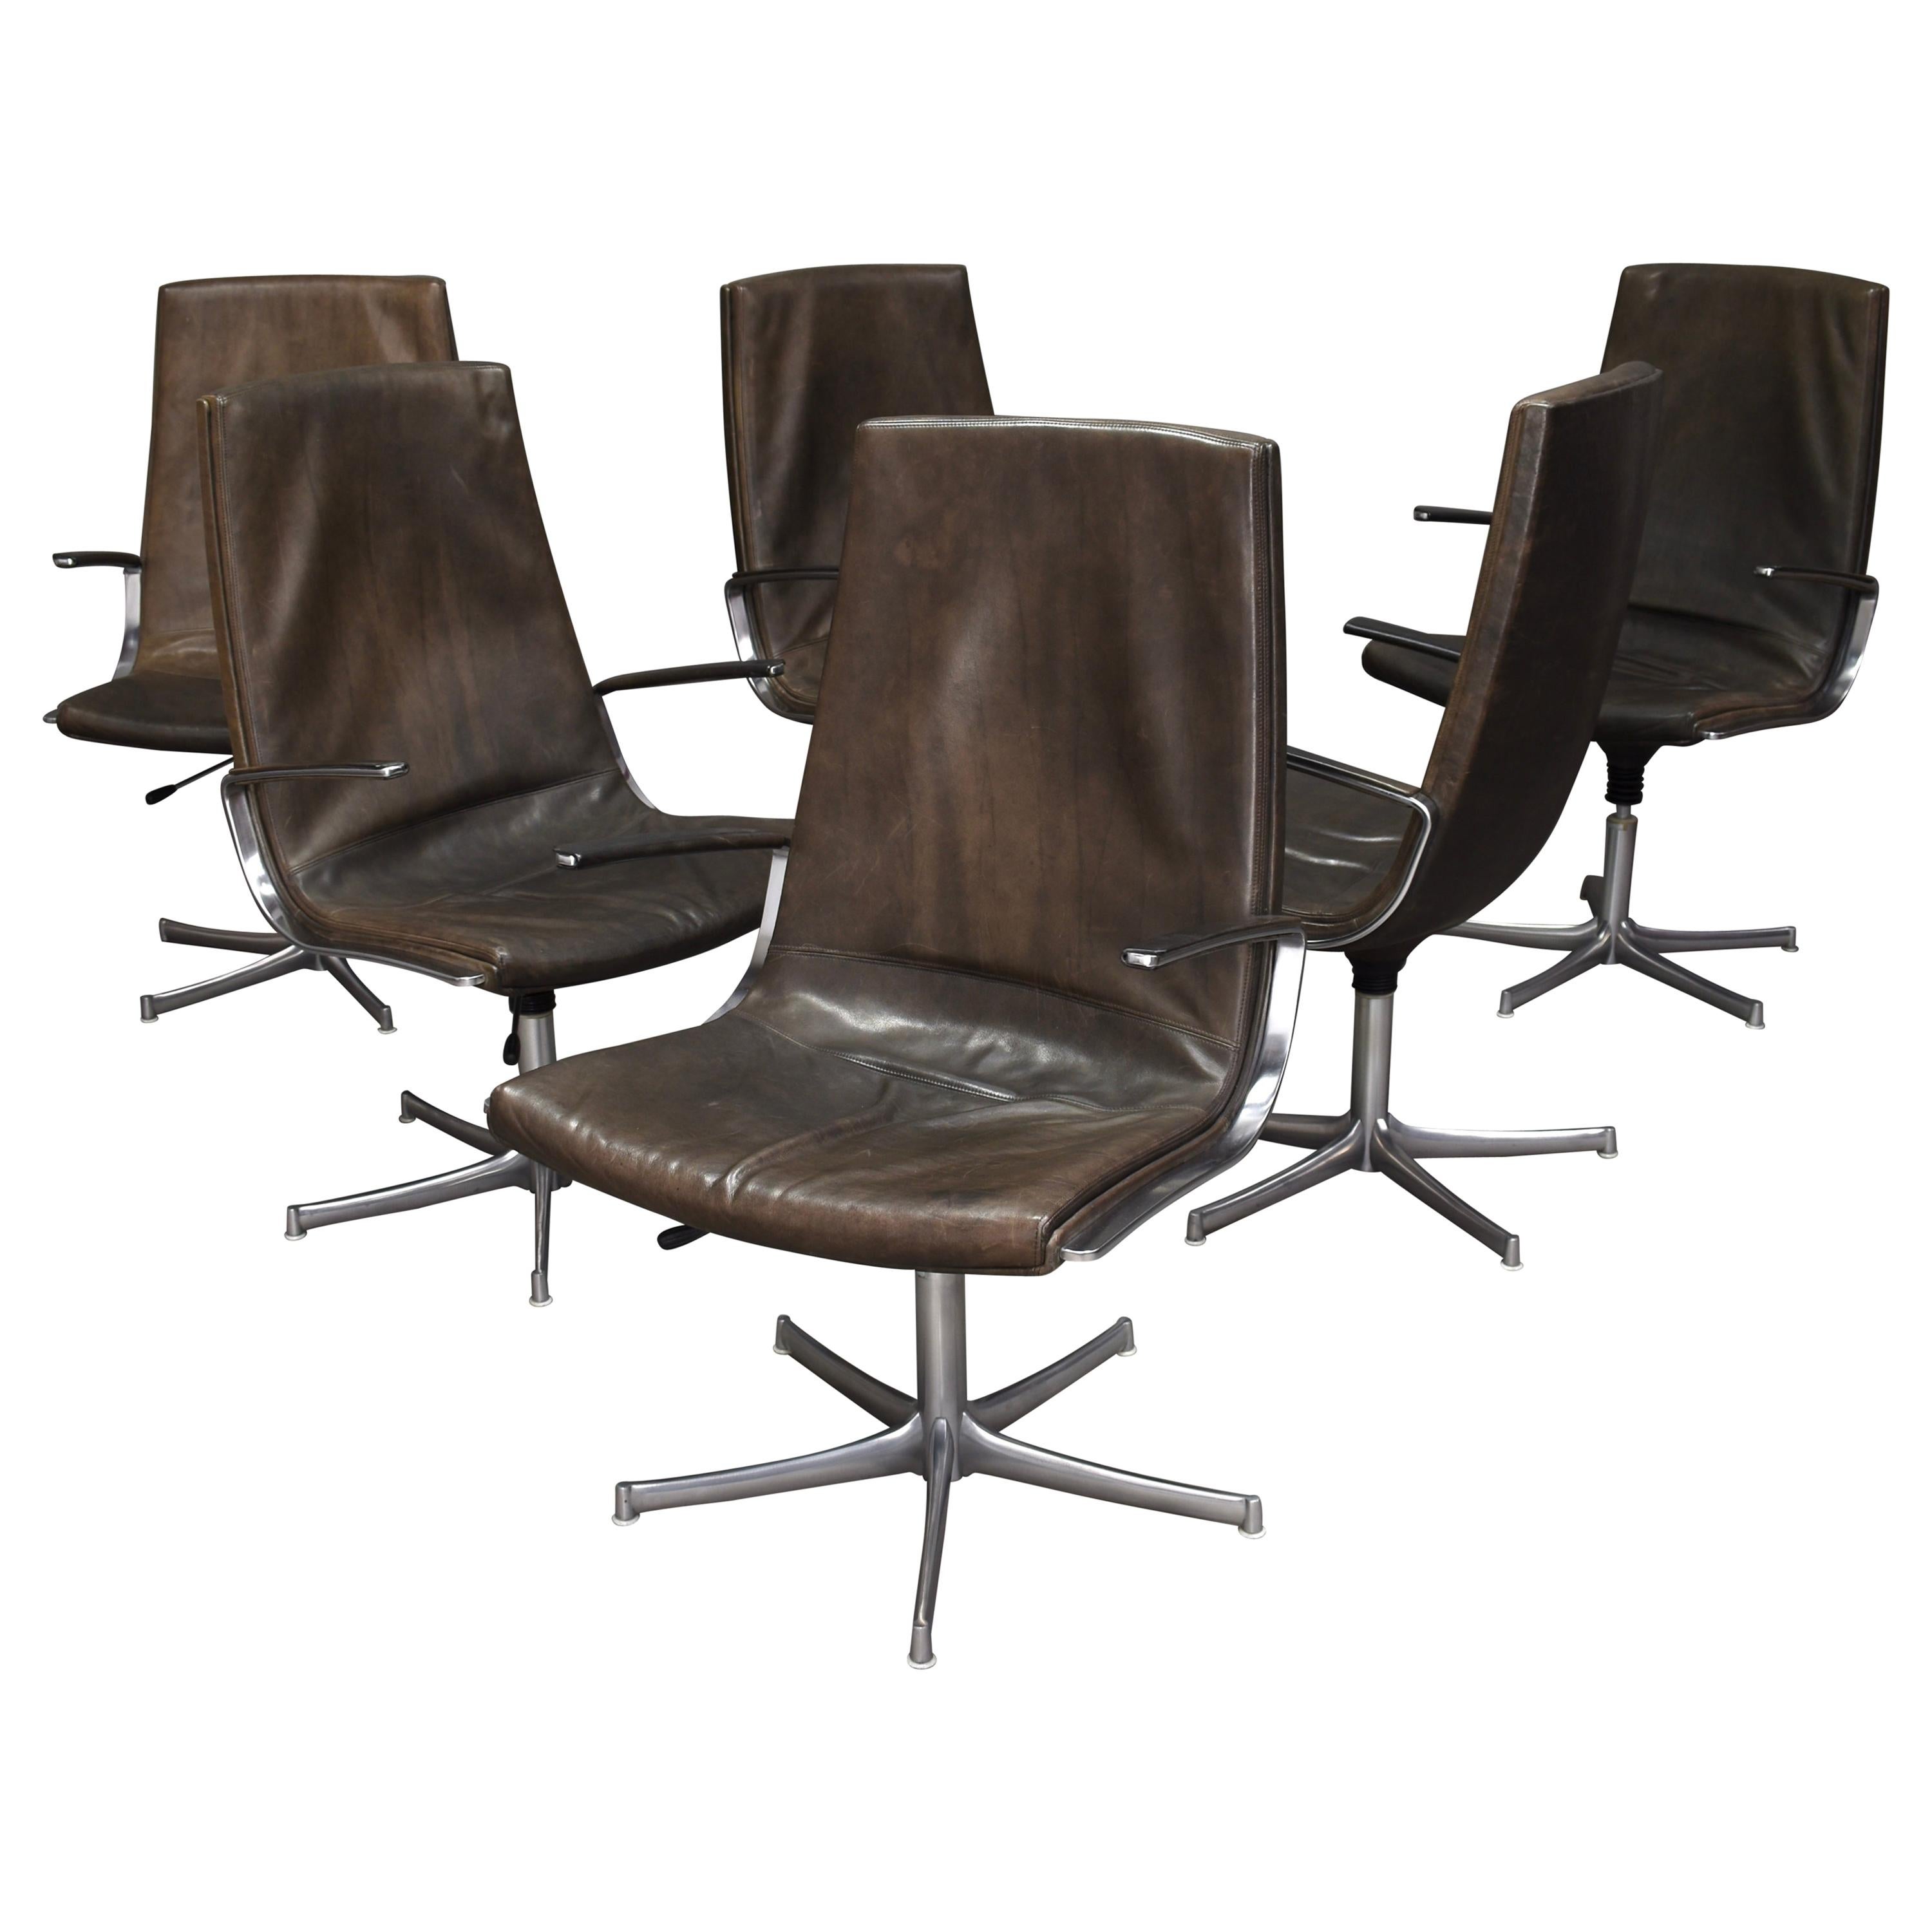 Four Walter Knoll Leather Office / Desk Swivel Armchairs, Germany, 1975